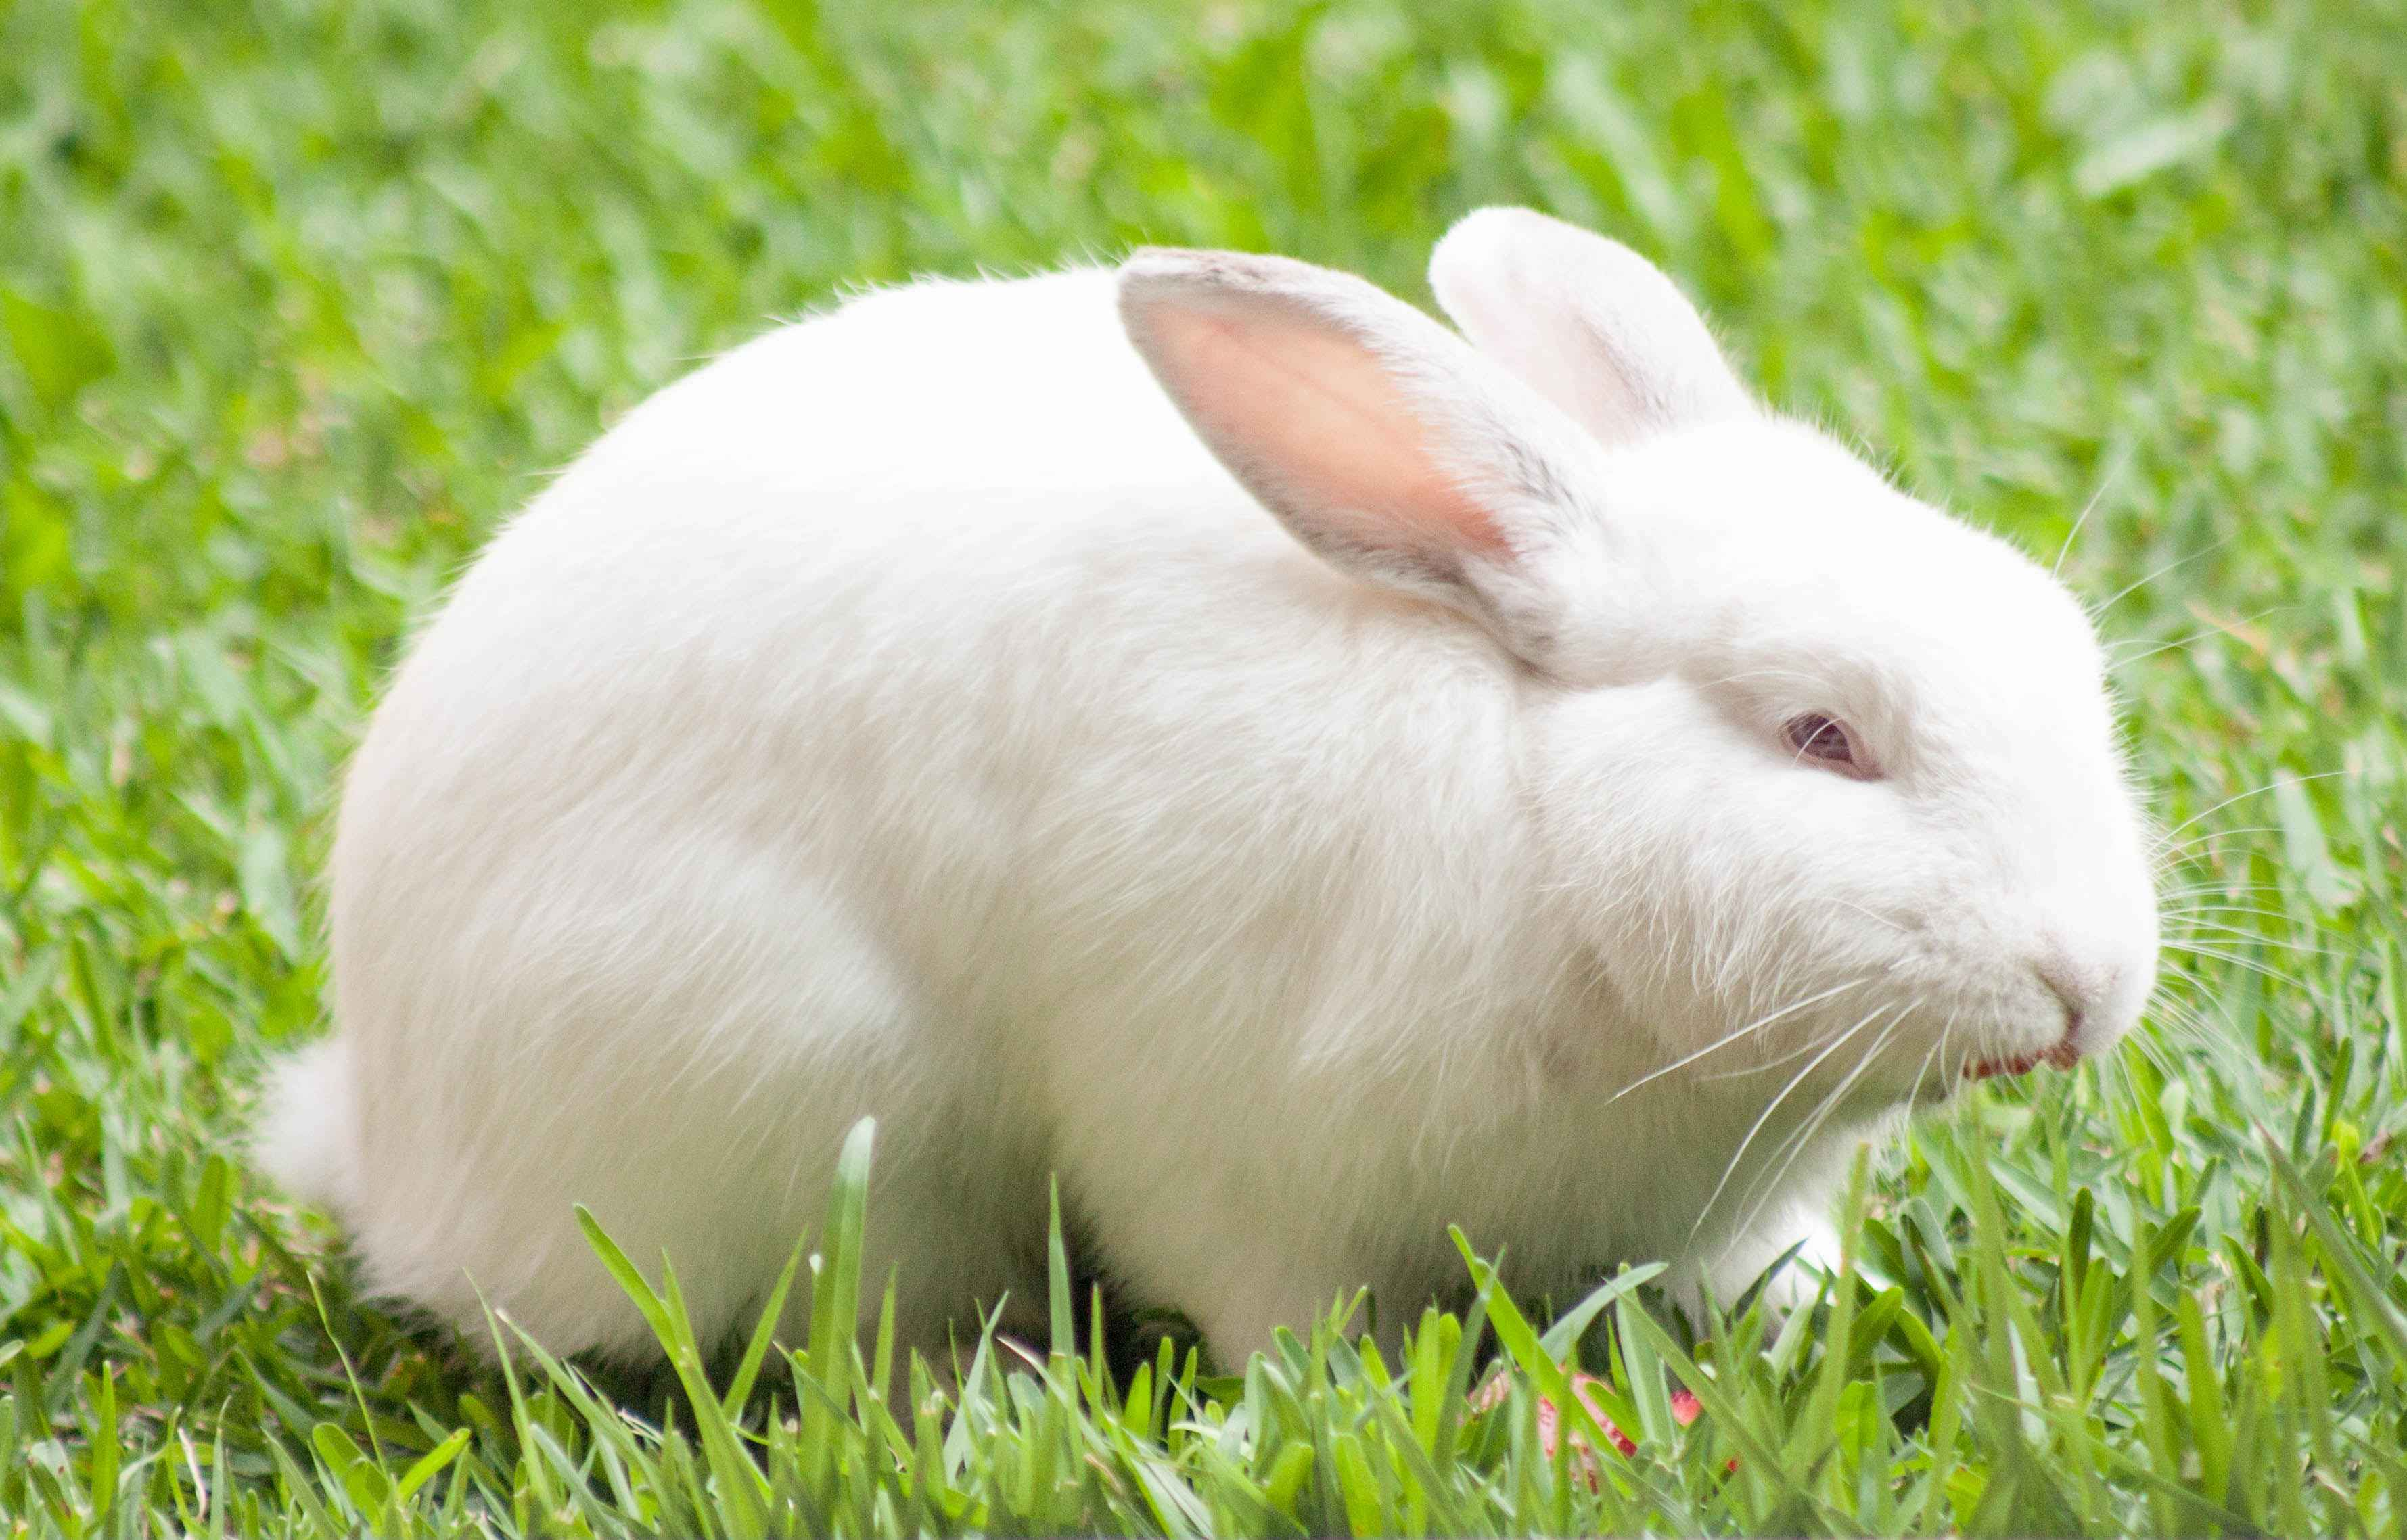 Surviving the Cold: Can Rabbits Withstand Winter Weather Outdoors?